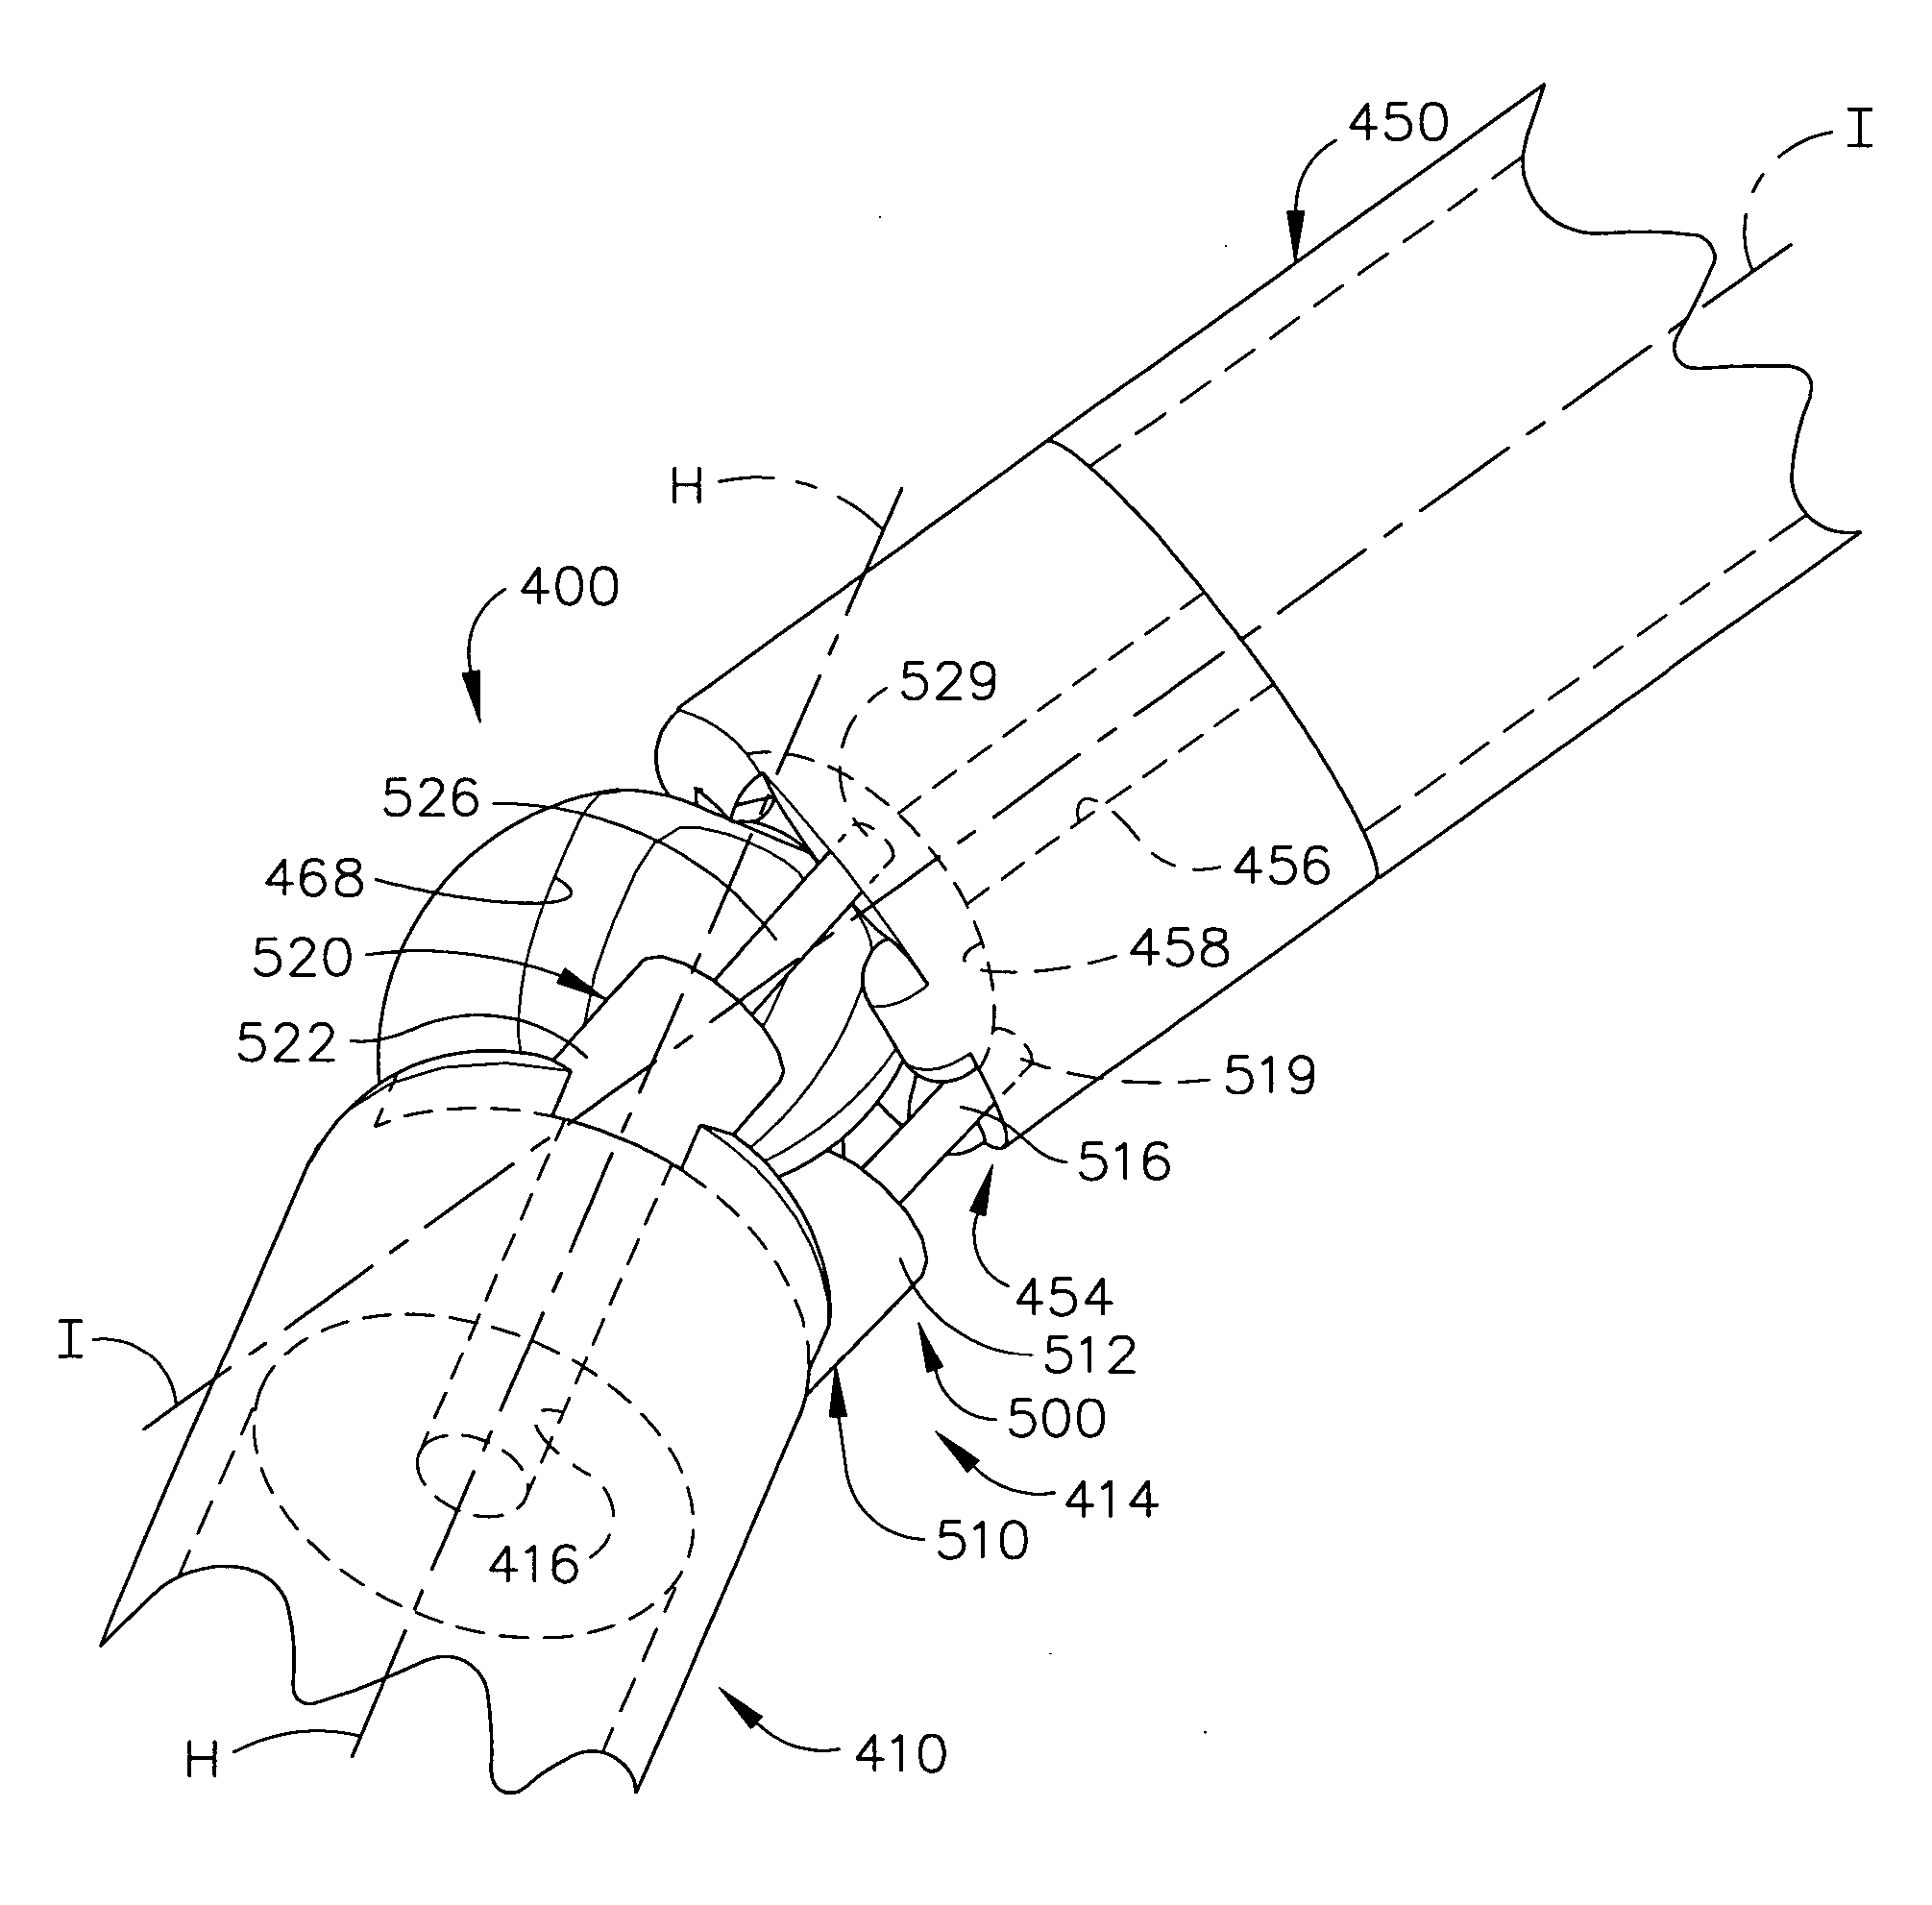 Hydraulically and electrically actuated articulation joints for surgical instruments